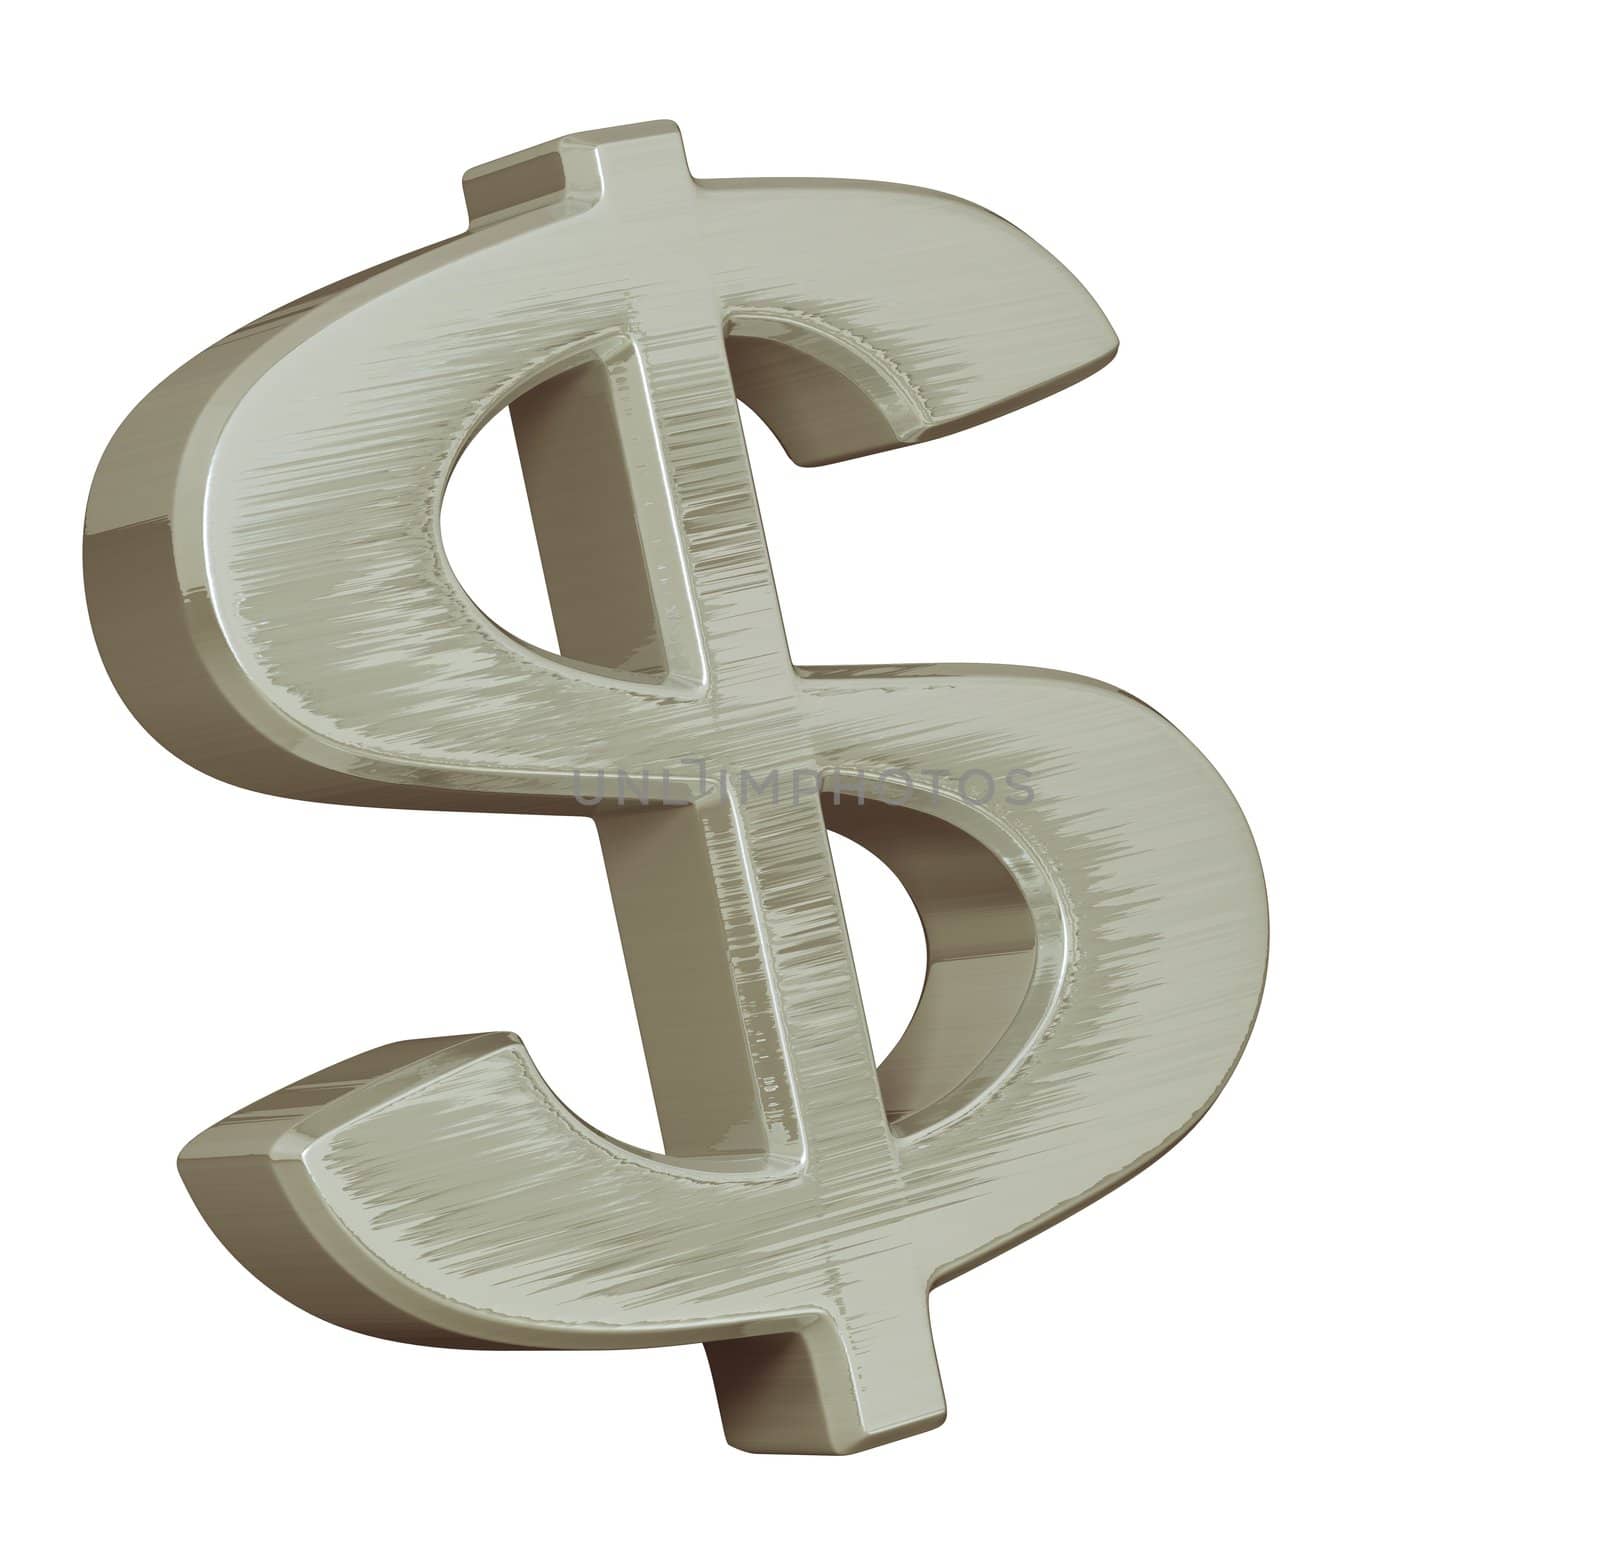 Big Dollar symbol with a brushed metallic effect and shiny aspect on a white background